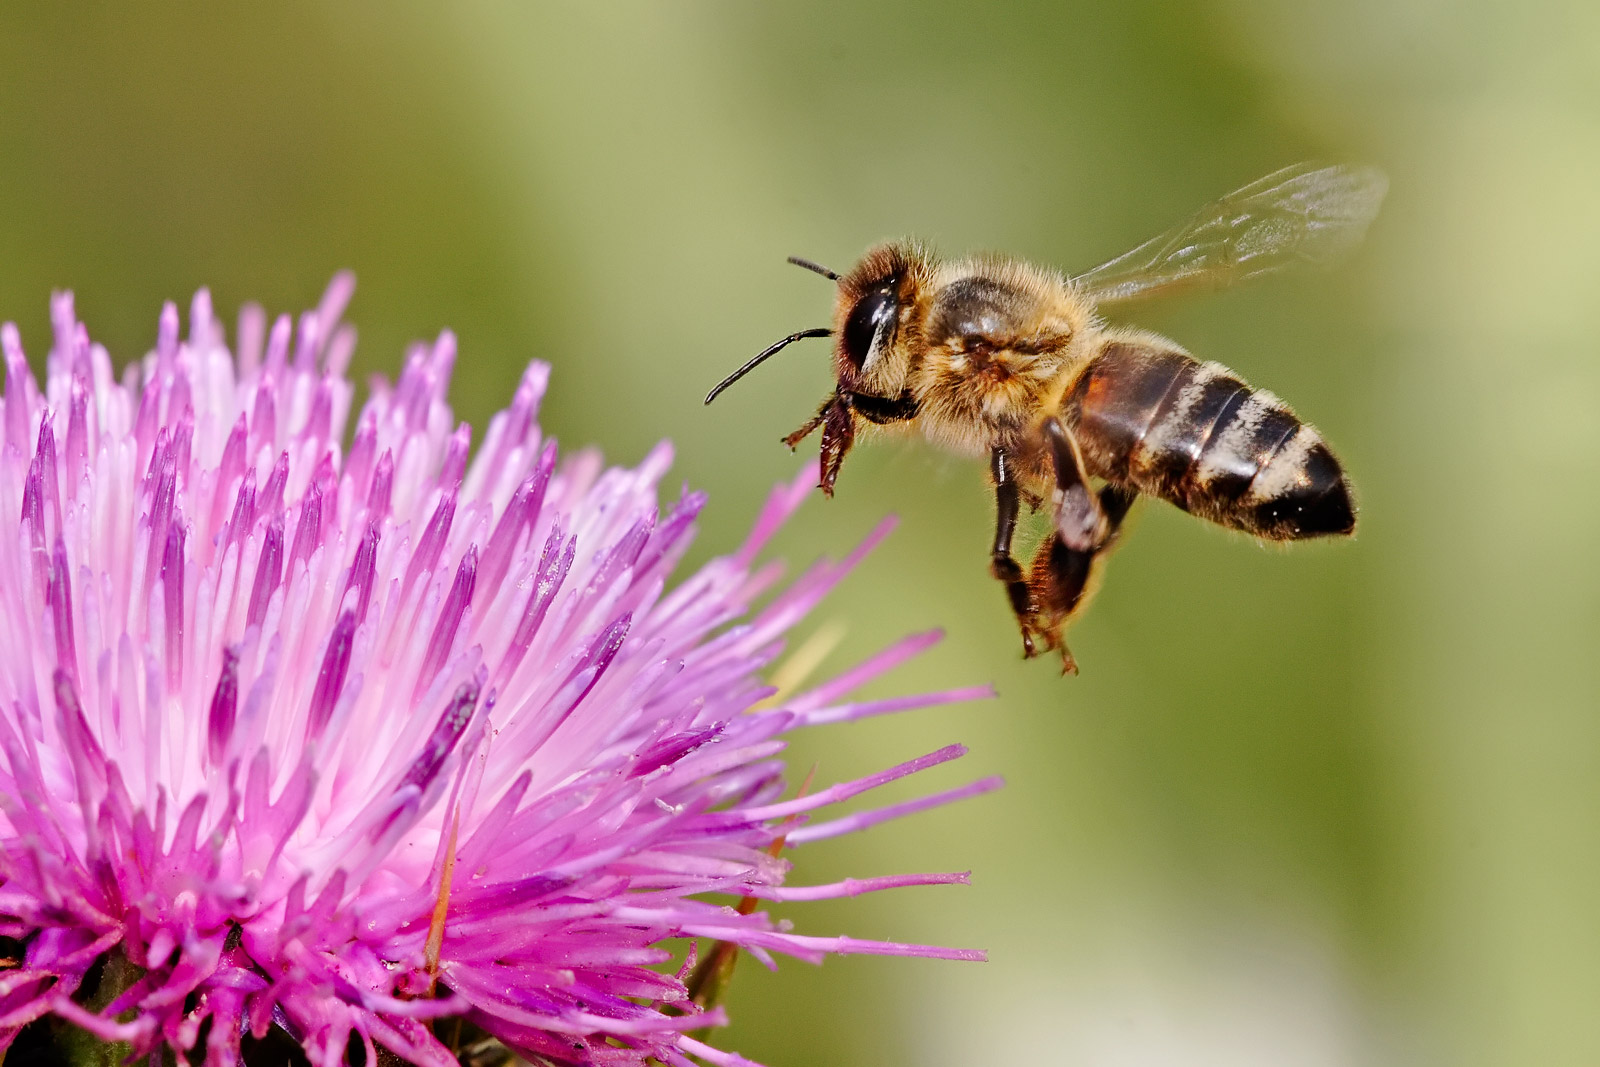 Beekeeping 101 Should You Raise Honey Bees Pros And Cons The Old Farmer S Almanac